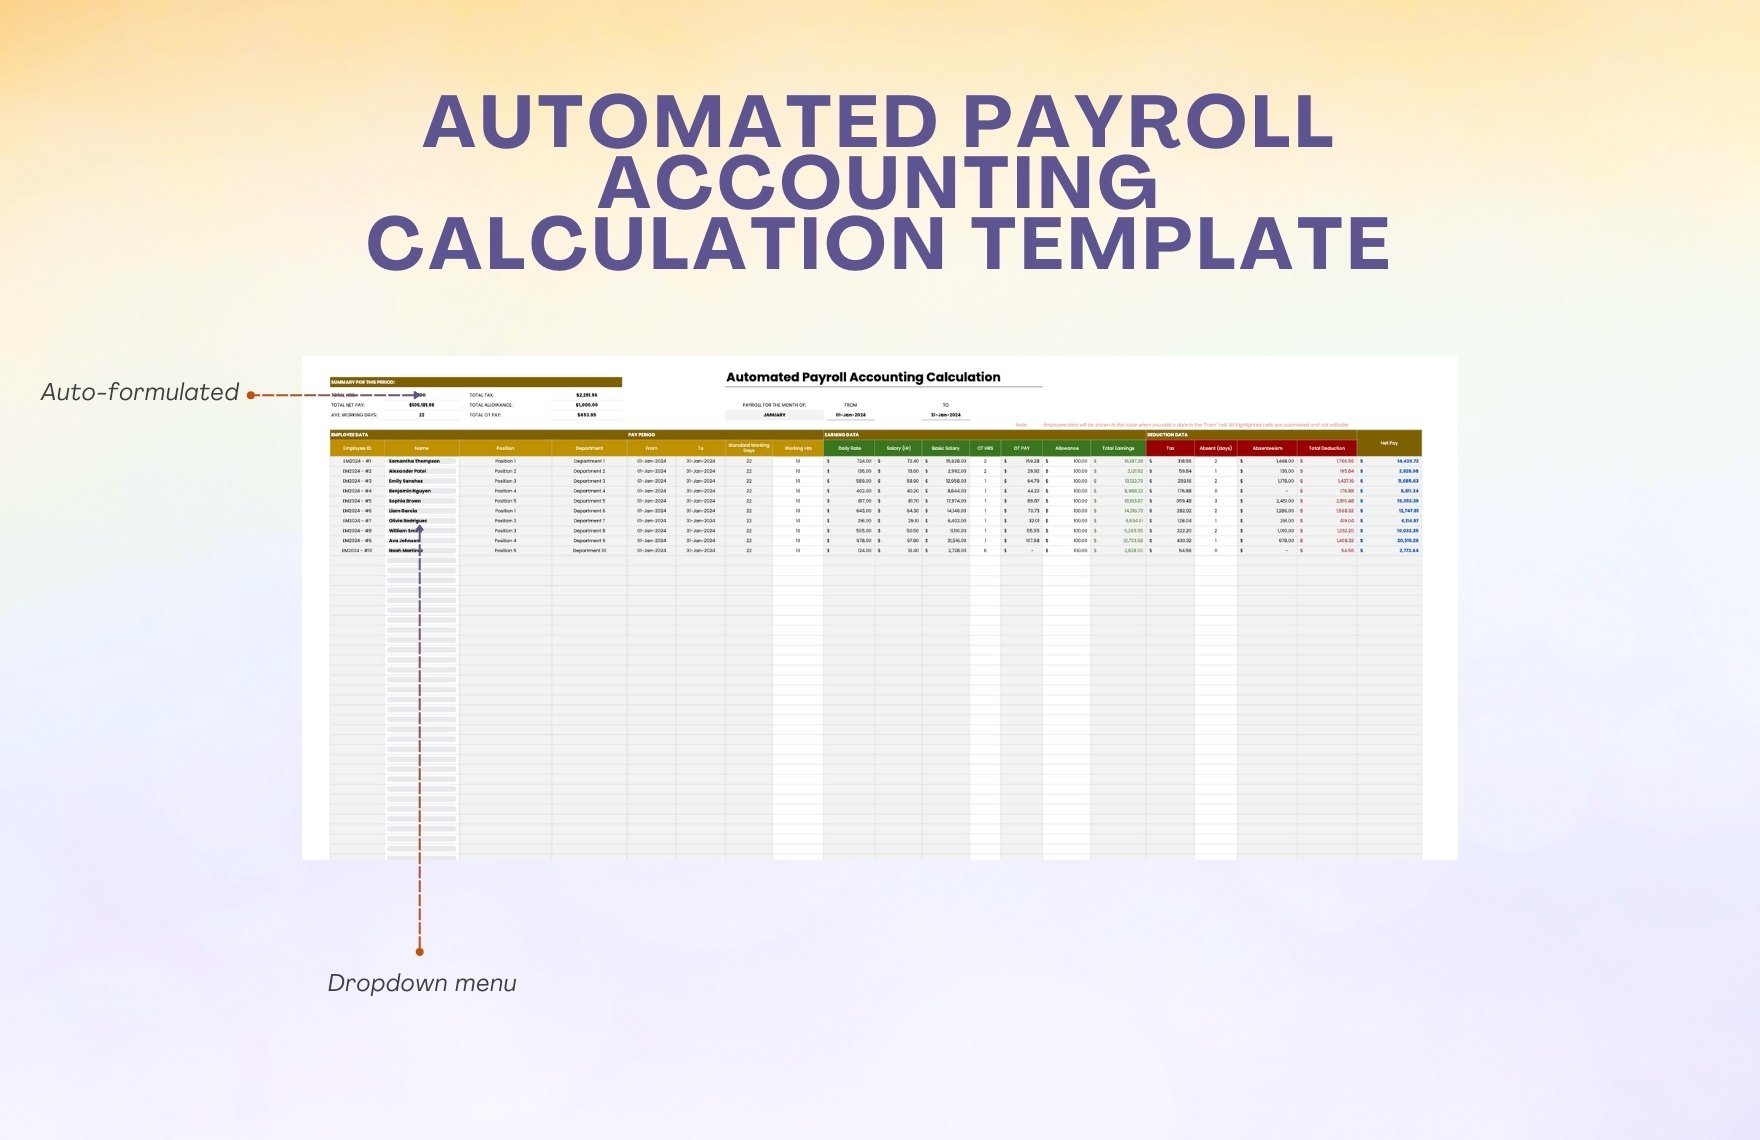 Automated Payroll Accounting Calculation Template